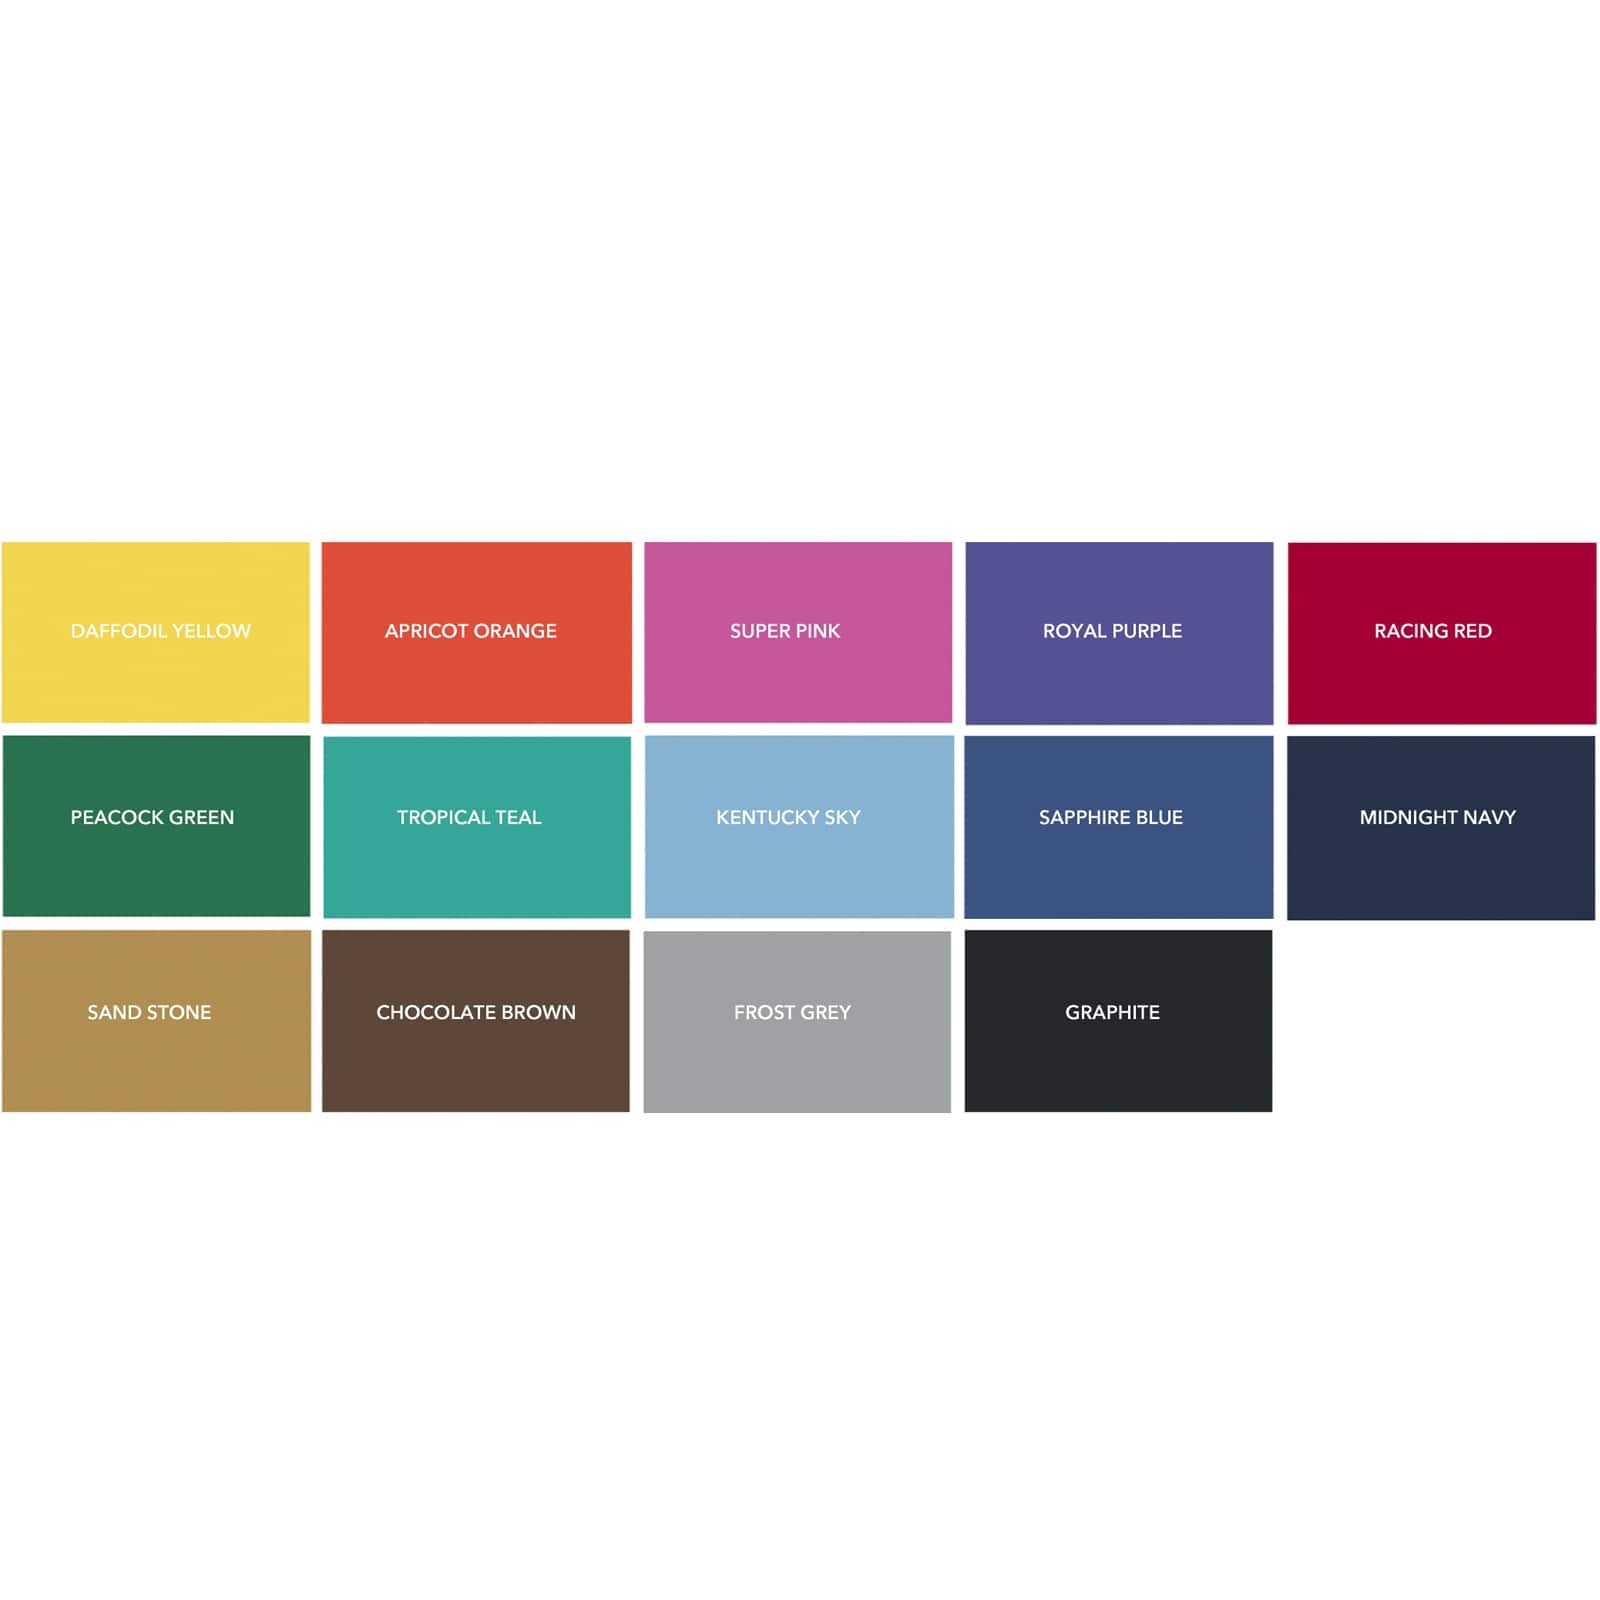 Rit® DyeMore™ Synthetic Fabric Dye, Michaels